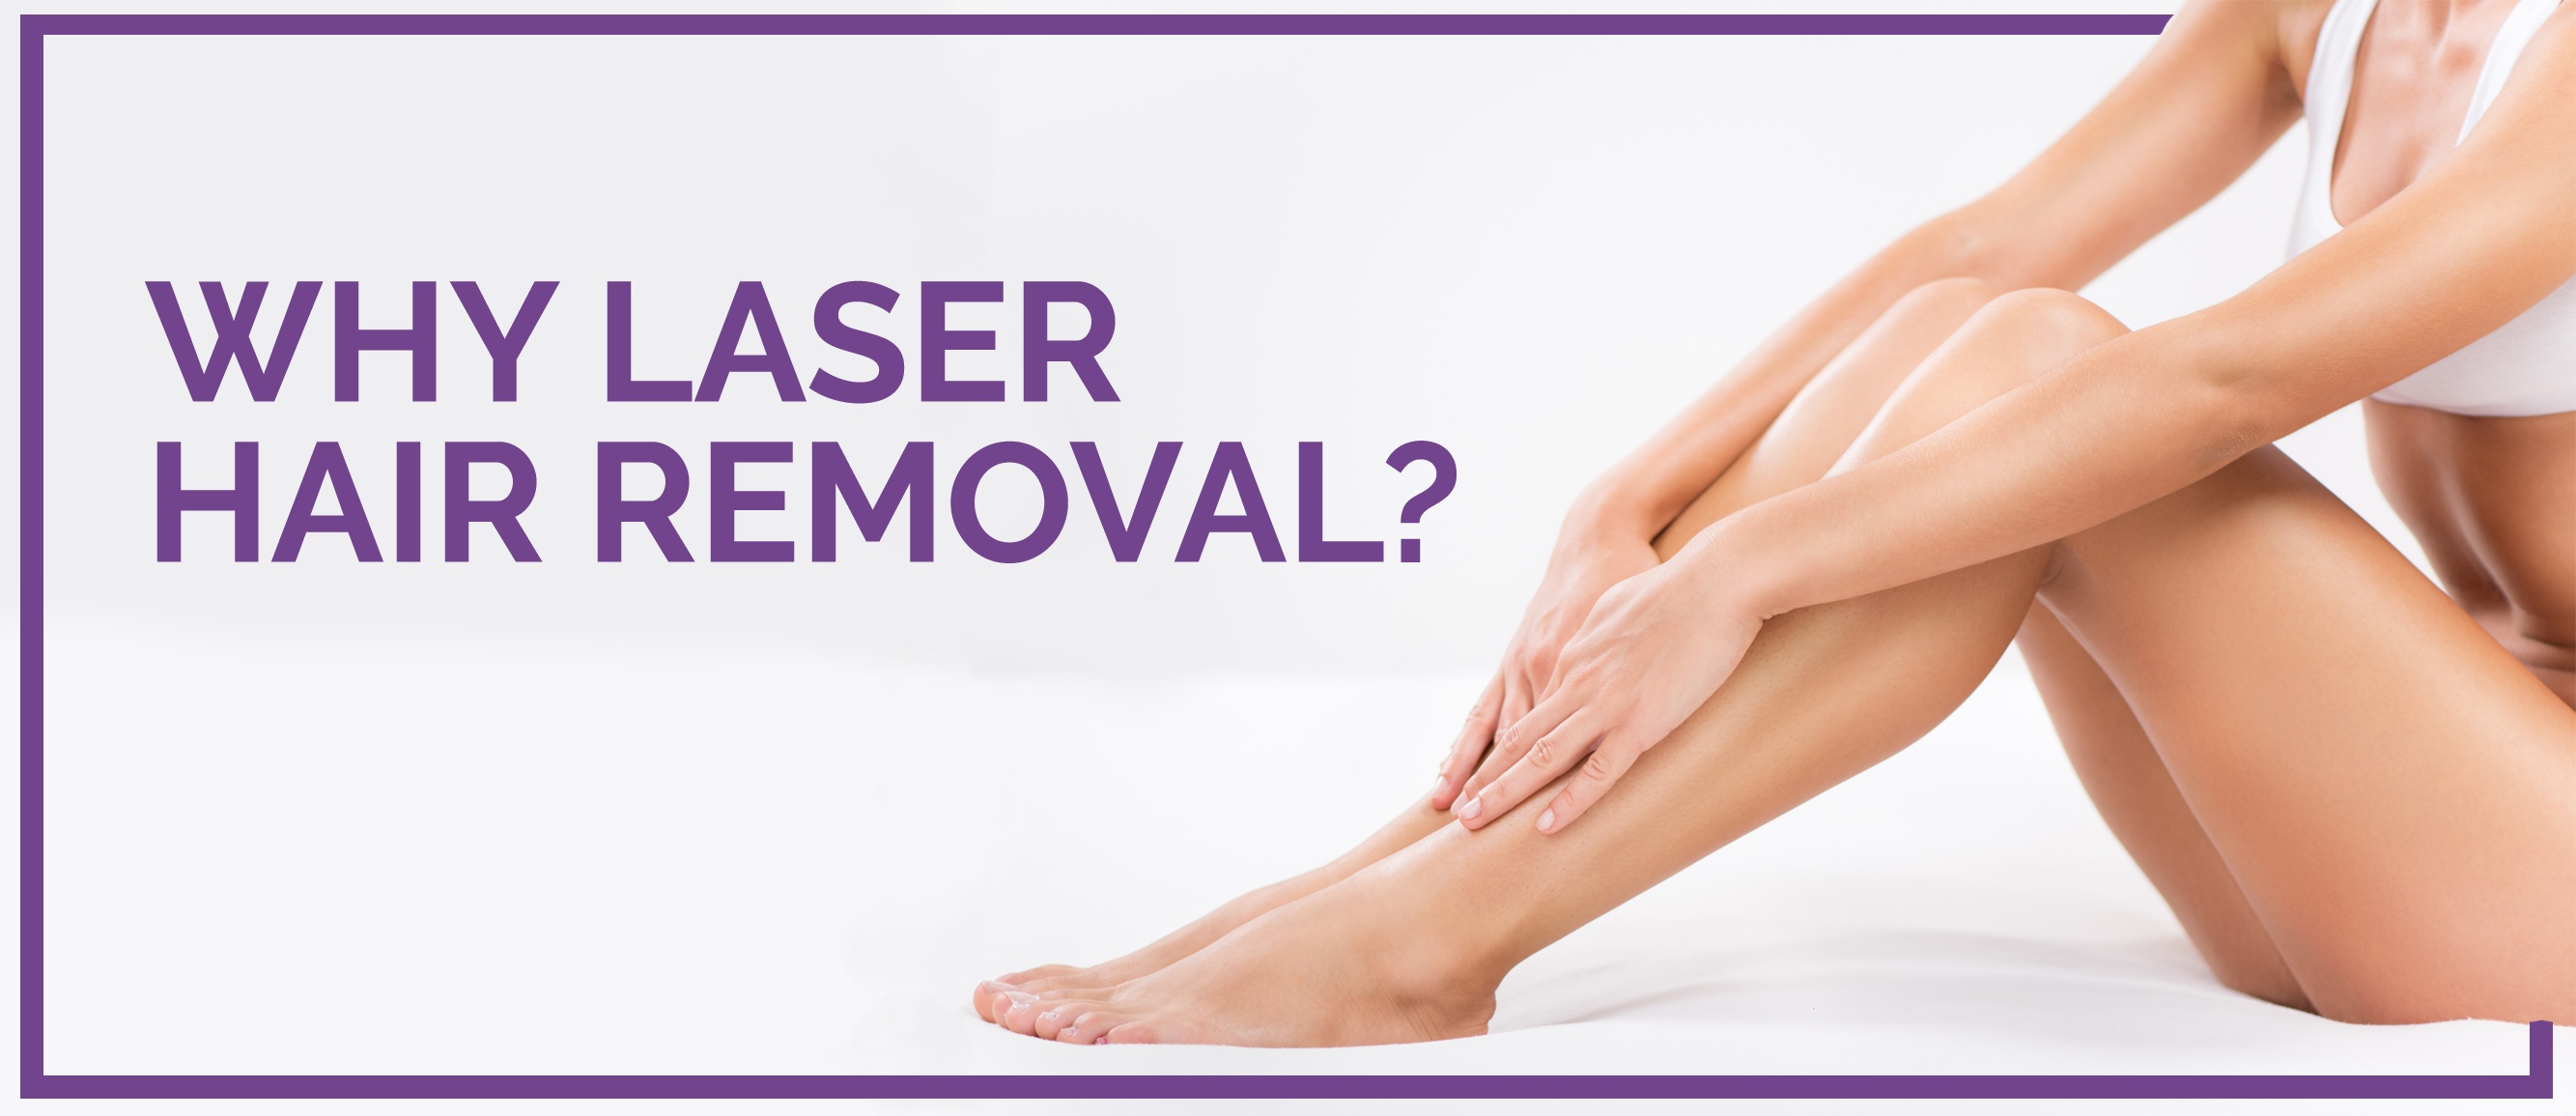 Why Laser Hair Removal? | Eureka Body Care and Spa